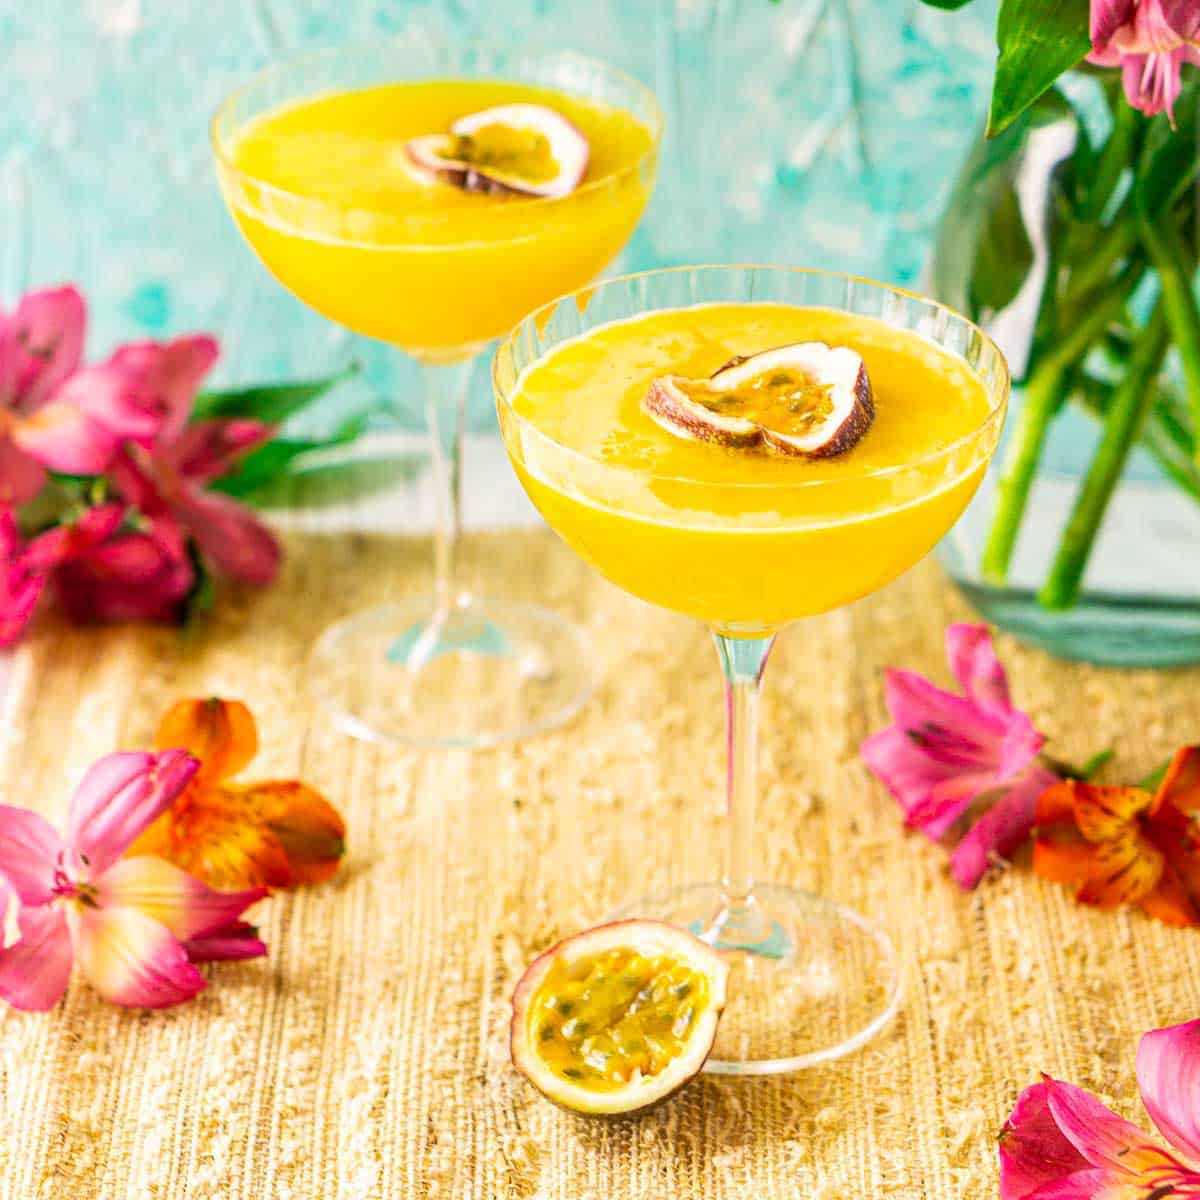 Two passion fruit martinis on a straw placemat with colorful flowers around them.